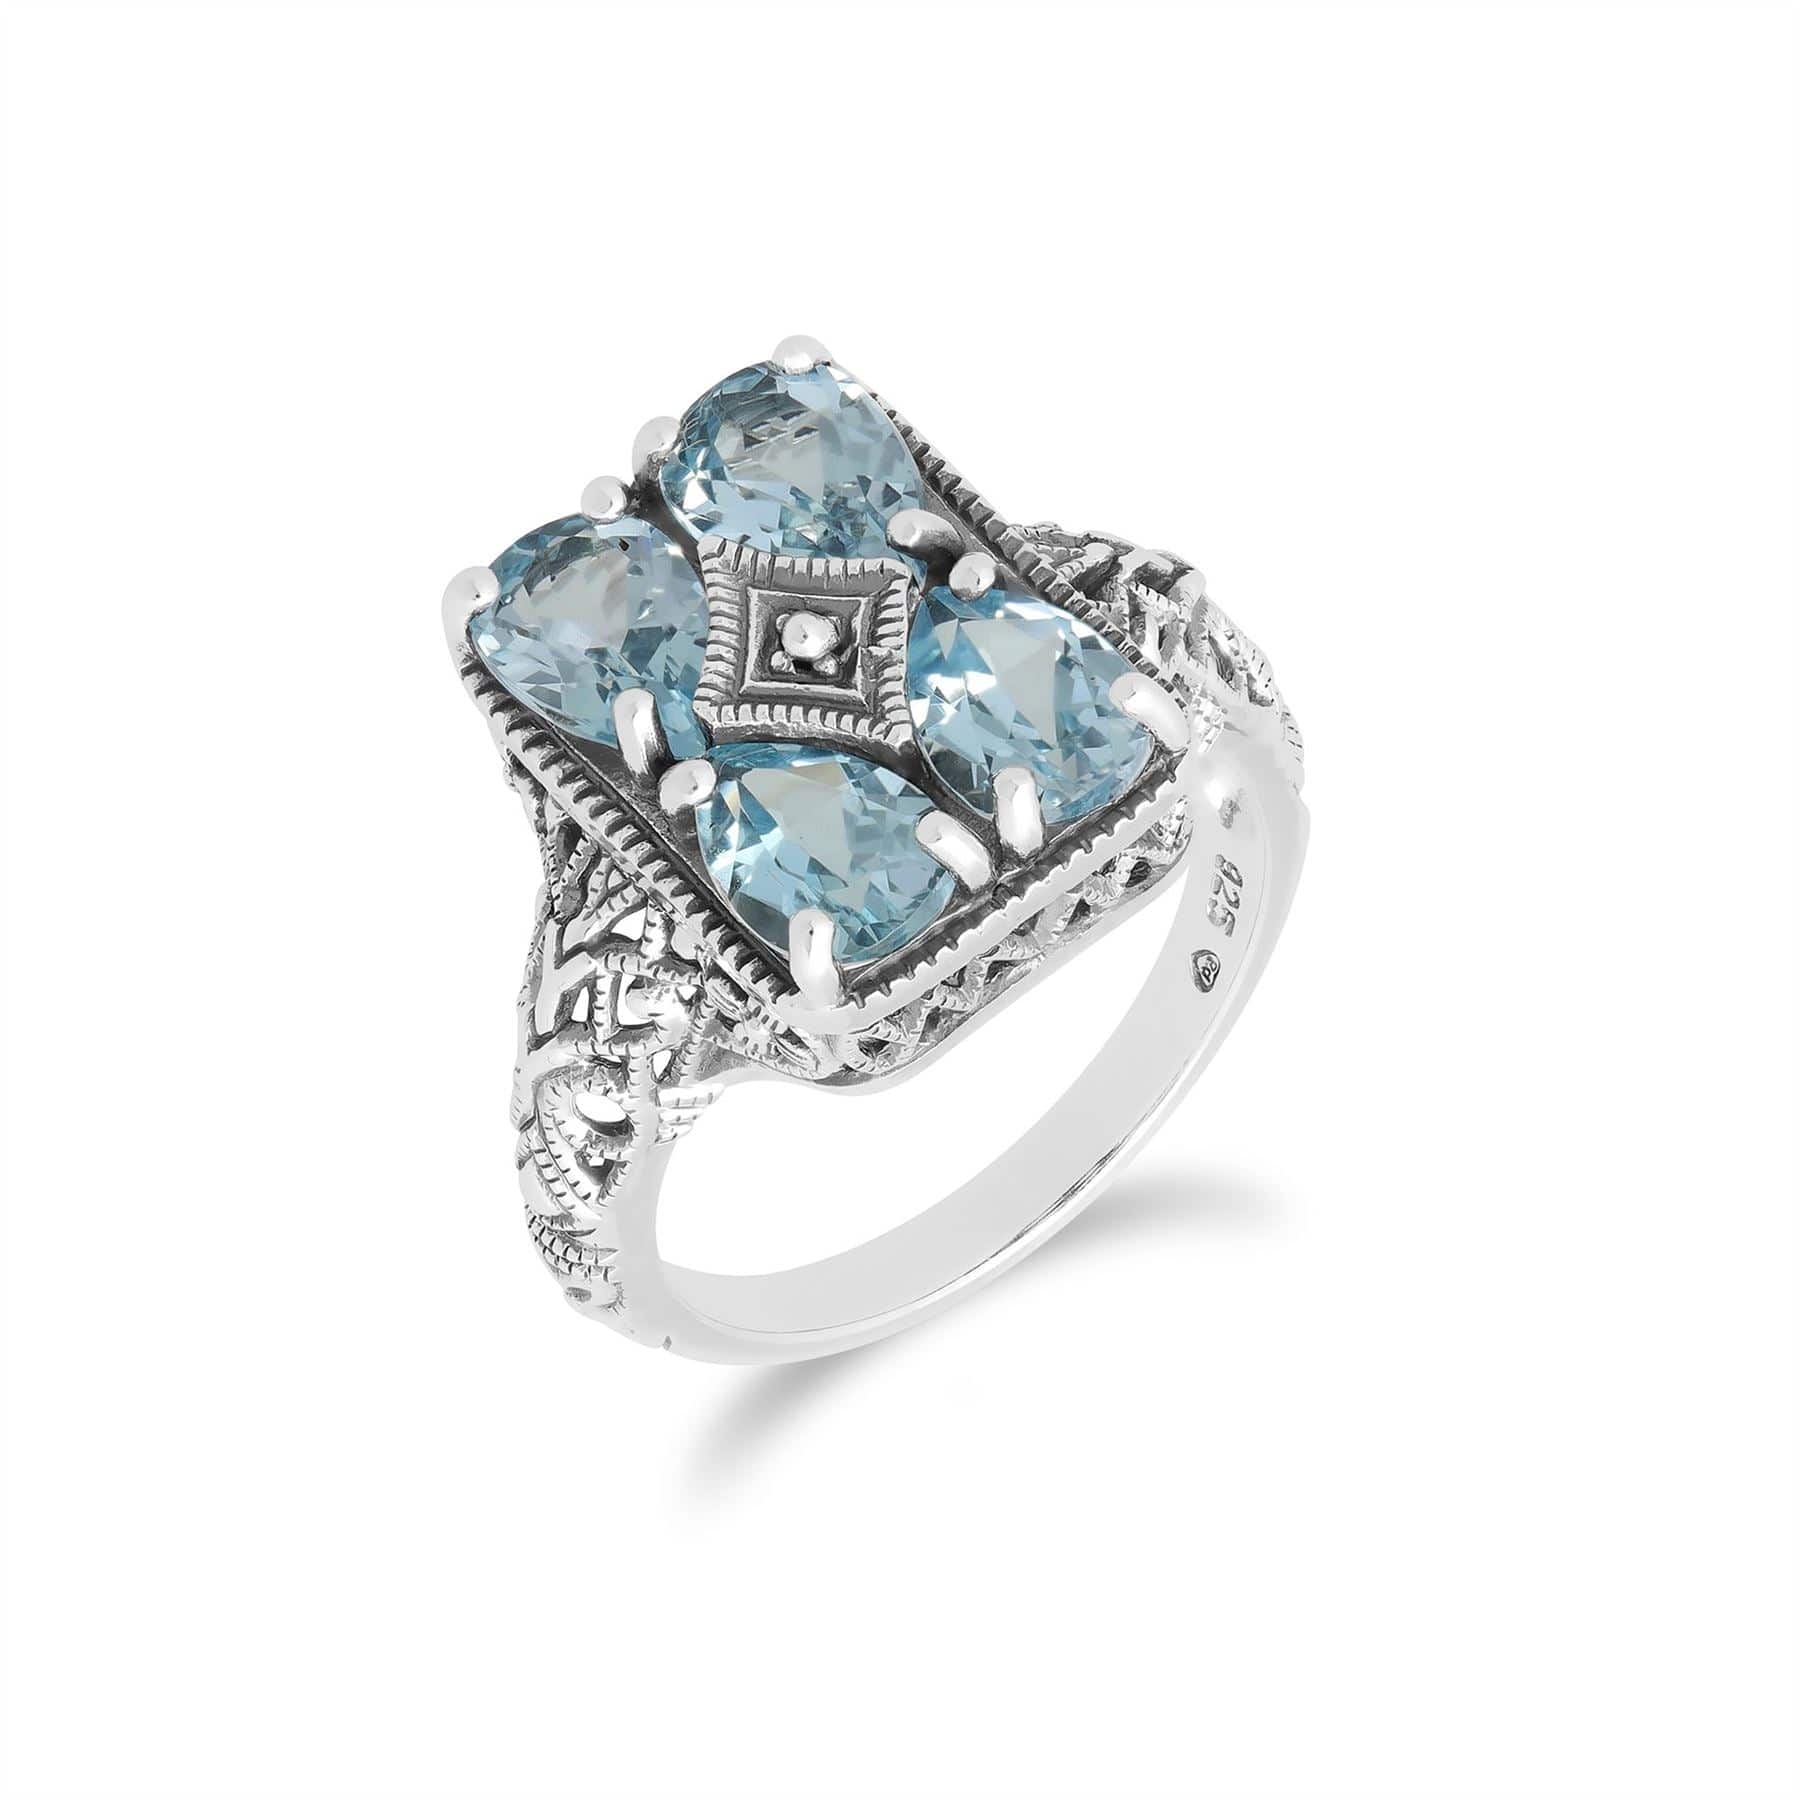 241R031007925 Art Nouveau Inspired Blue Topaz Statement Ring in 925 Sterling Silver 1